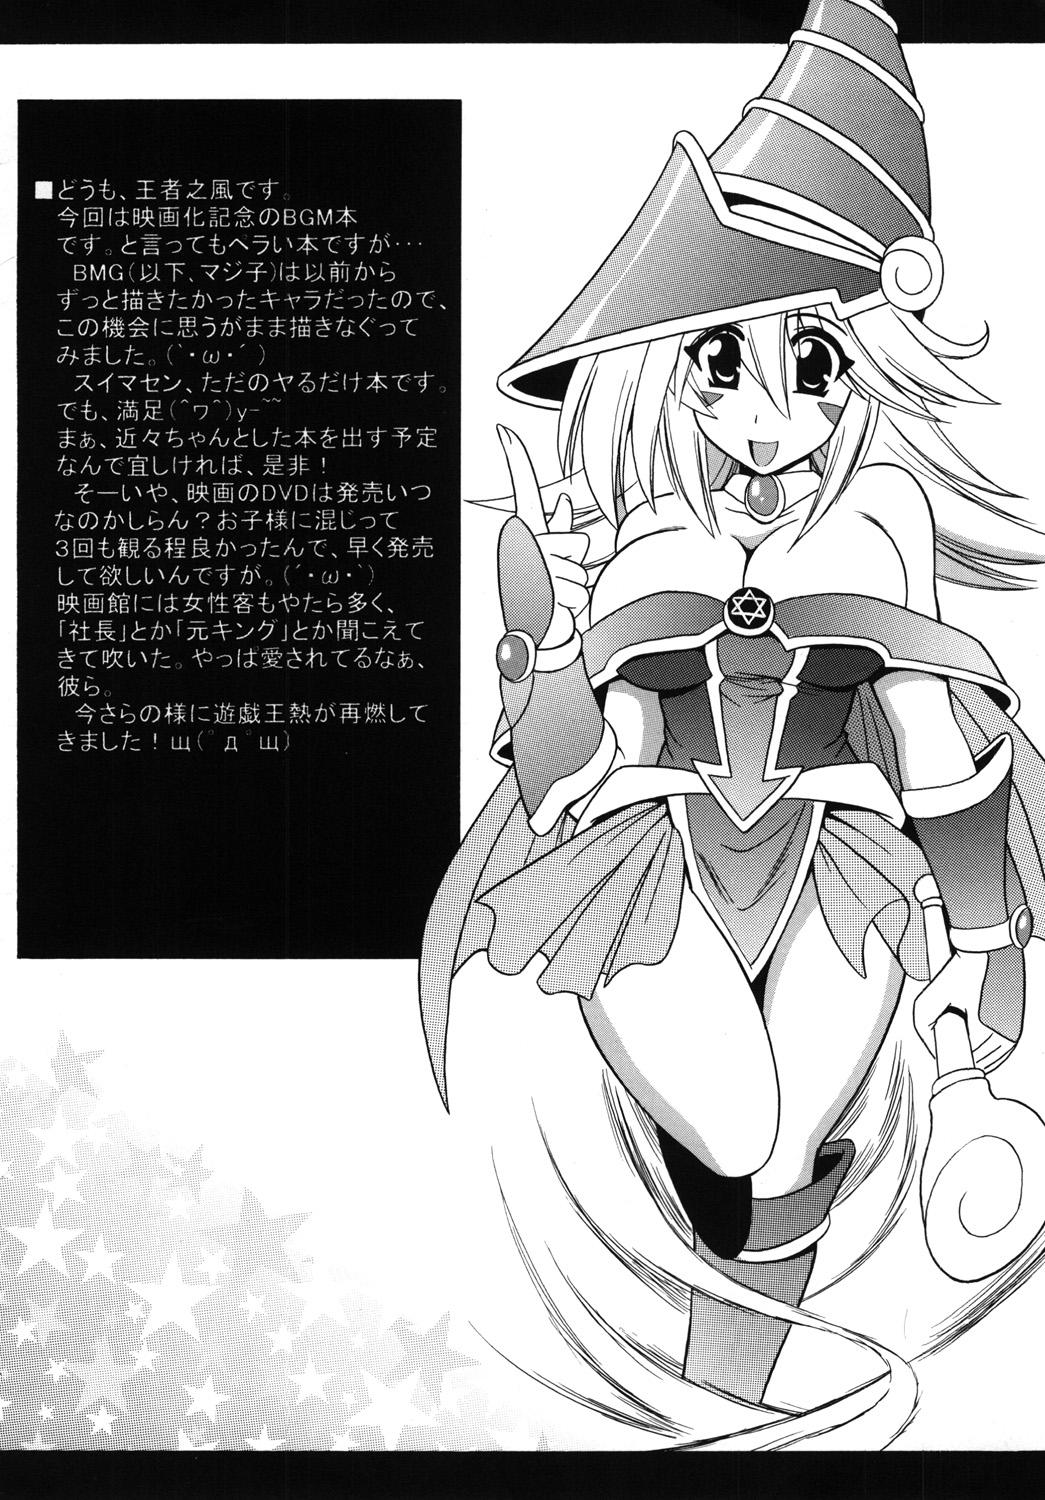 BMG to Ecchi Shiyou ♡ | Let's Have Sex with Dark Magician Girl ♡ 1